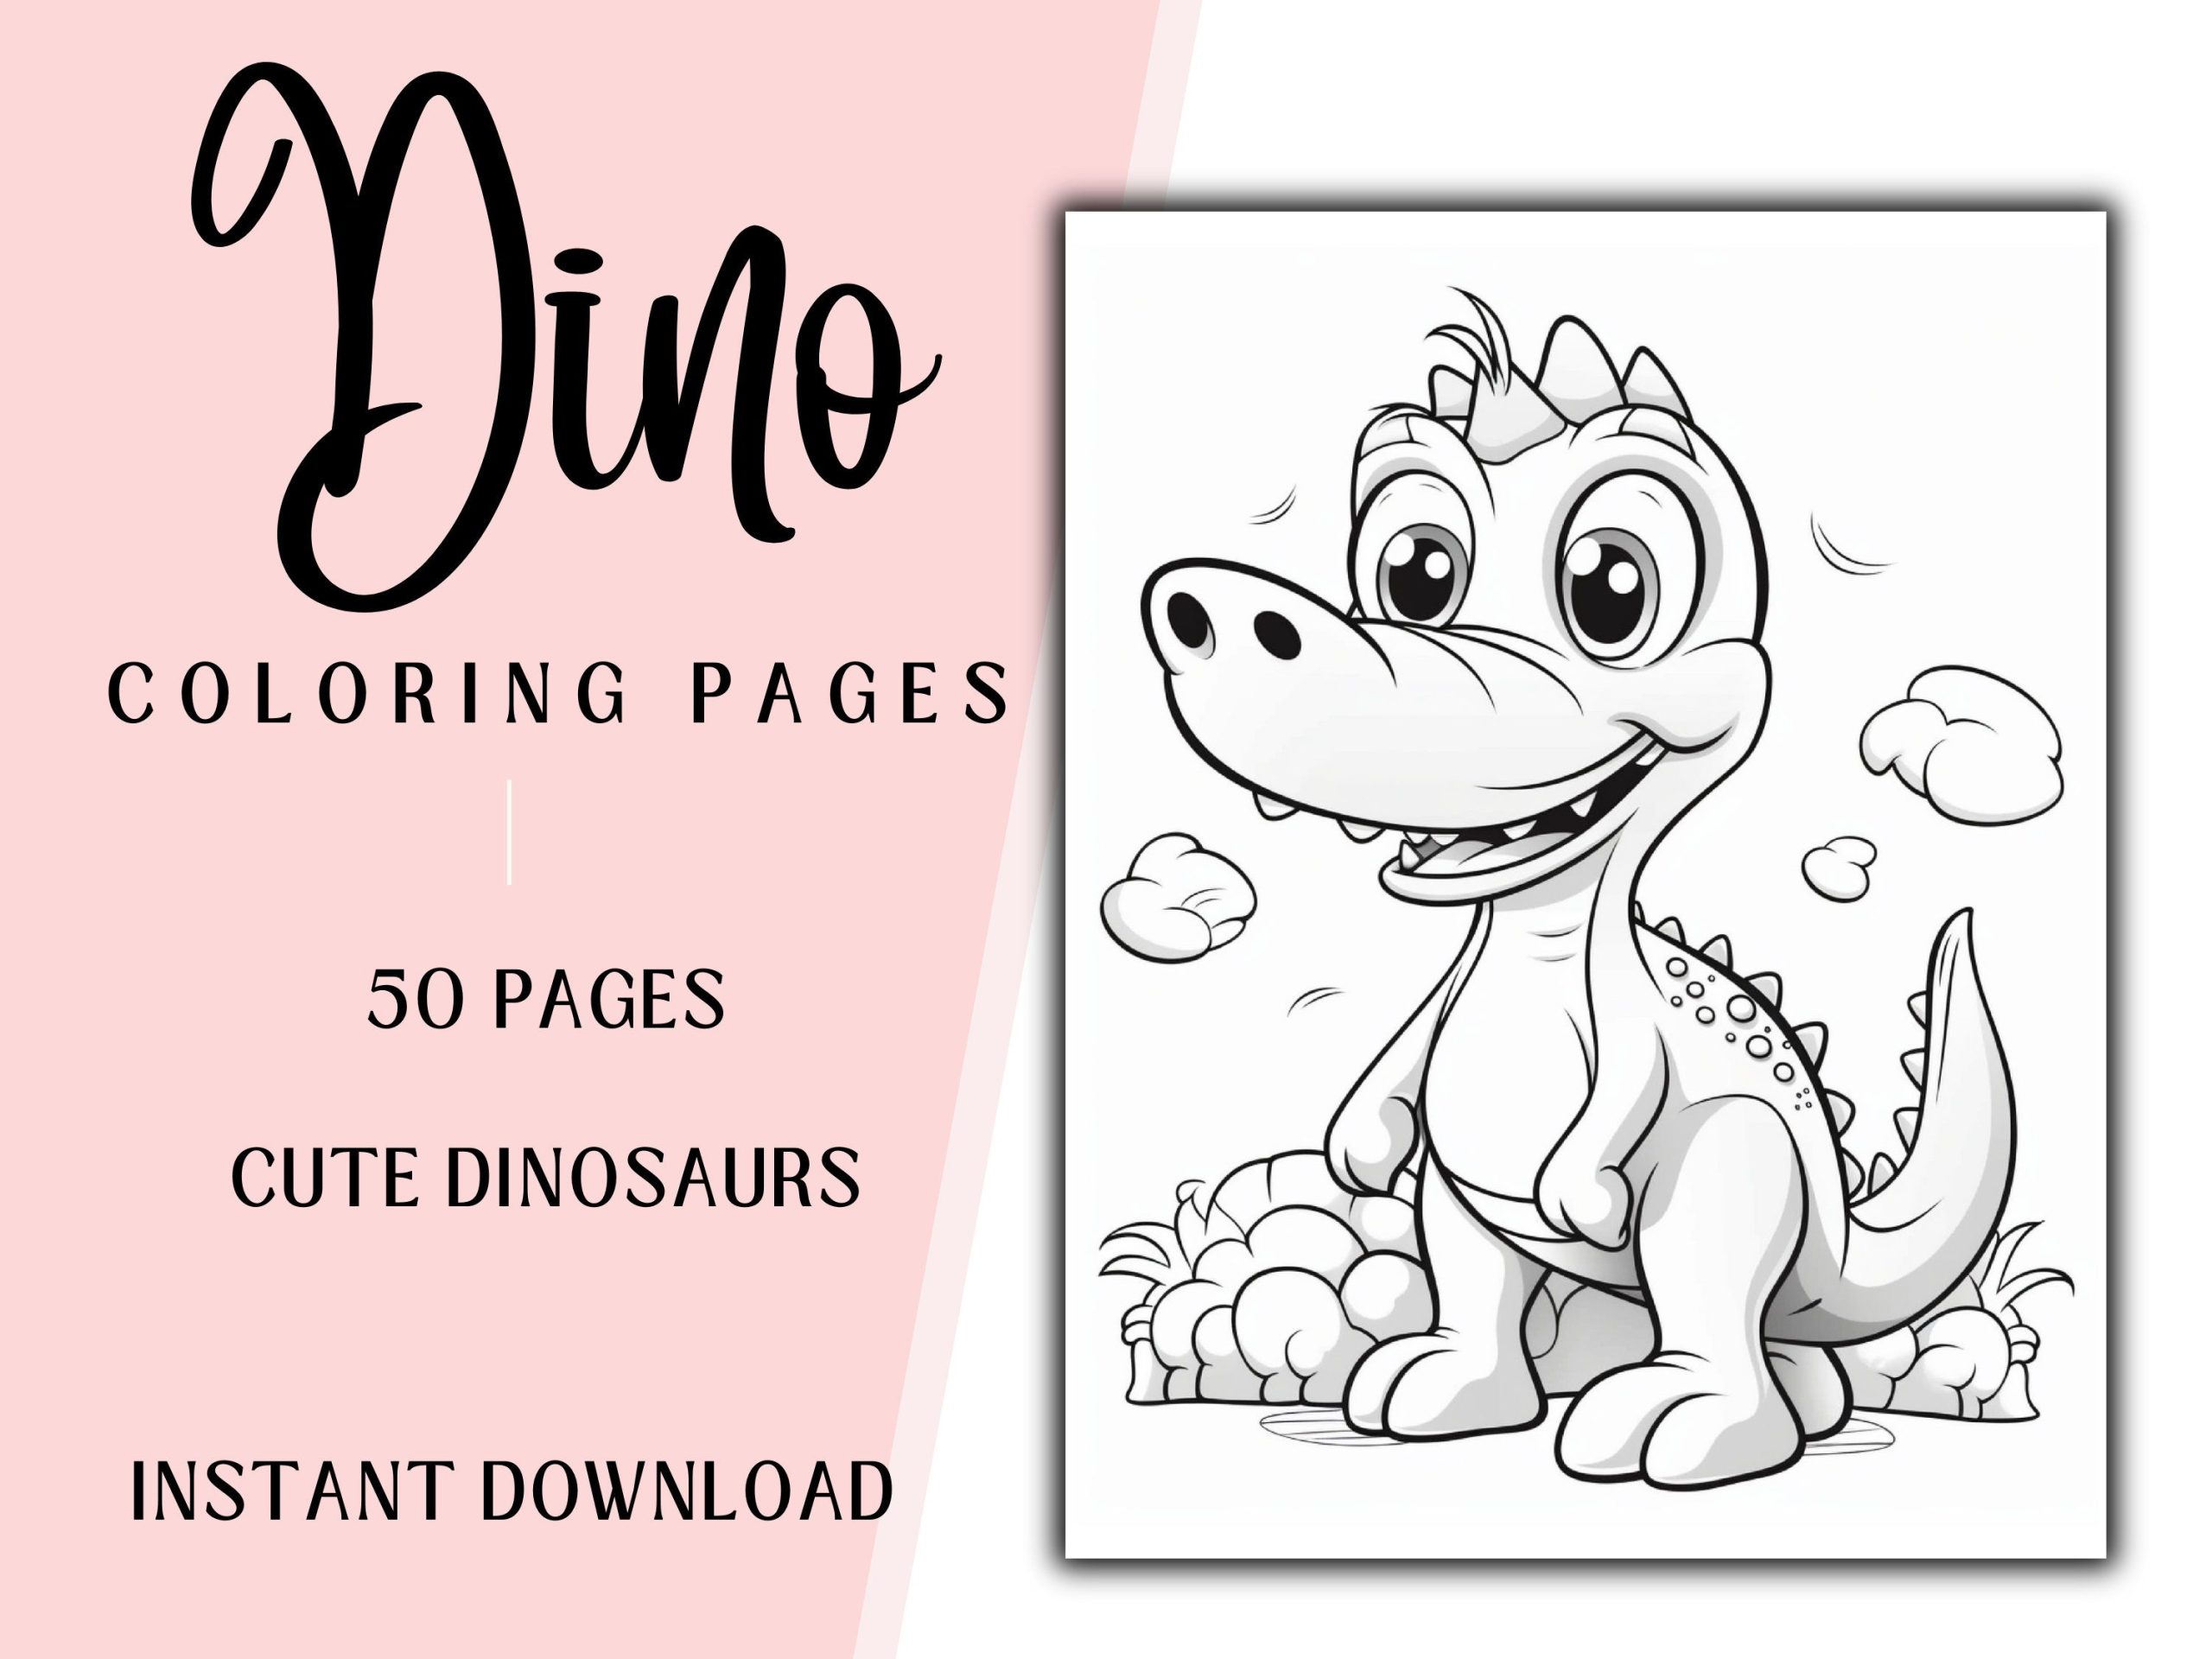 Dino Coloring Pages Dinosaur Coloring Pages Creative Activity Dinosaur Printable Dinosaur Activity for Kids Kids Coloring Pages - Etsy